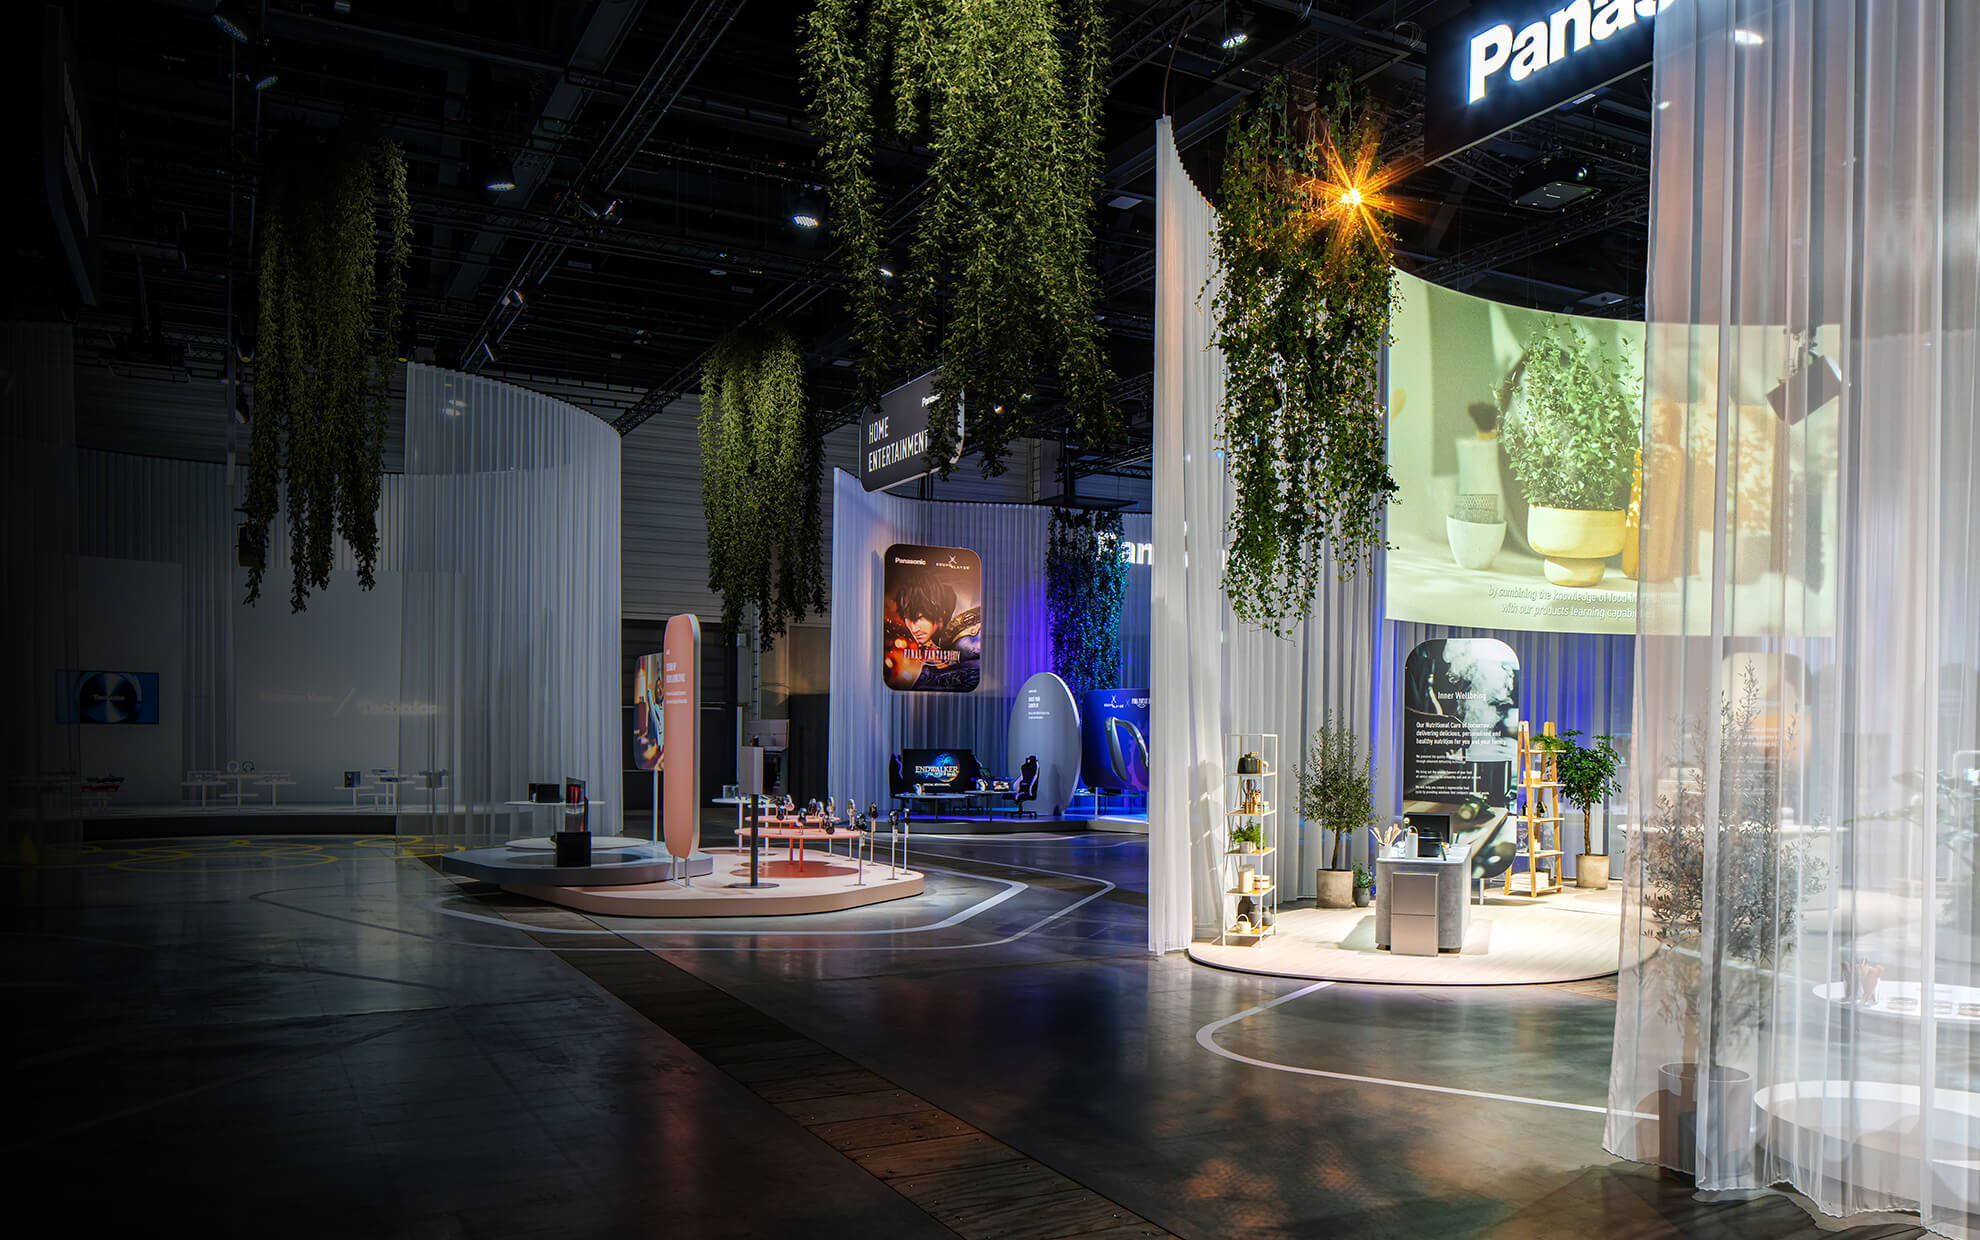 Sustainable exhibition stand for Panasonic at IFA 2022 in Berlin built by exhibition stand builder Display International.